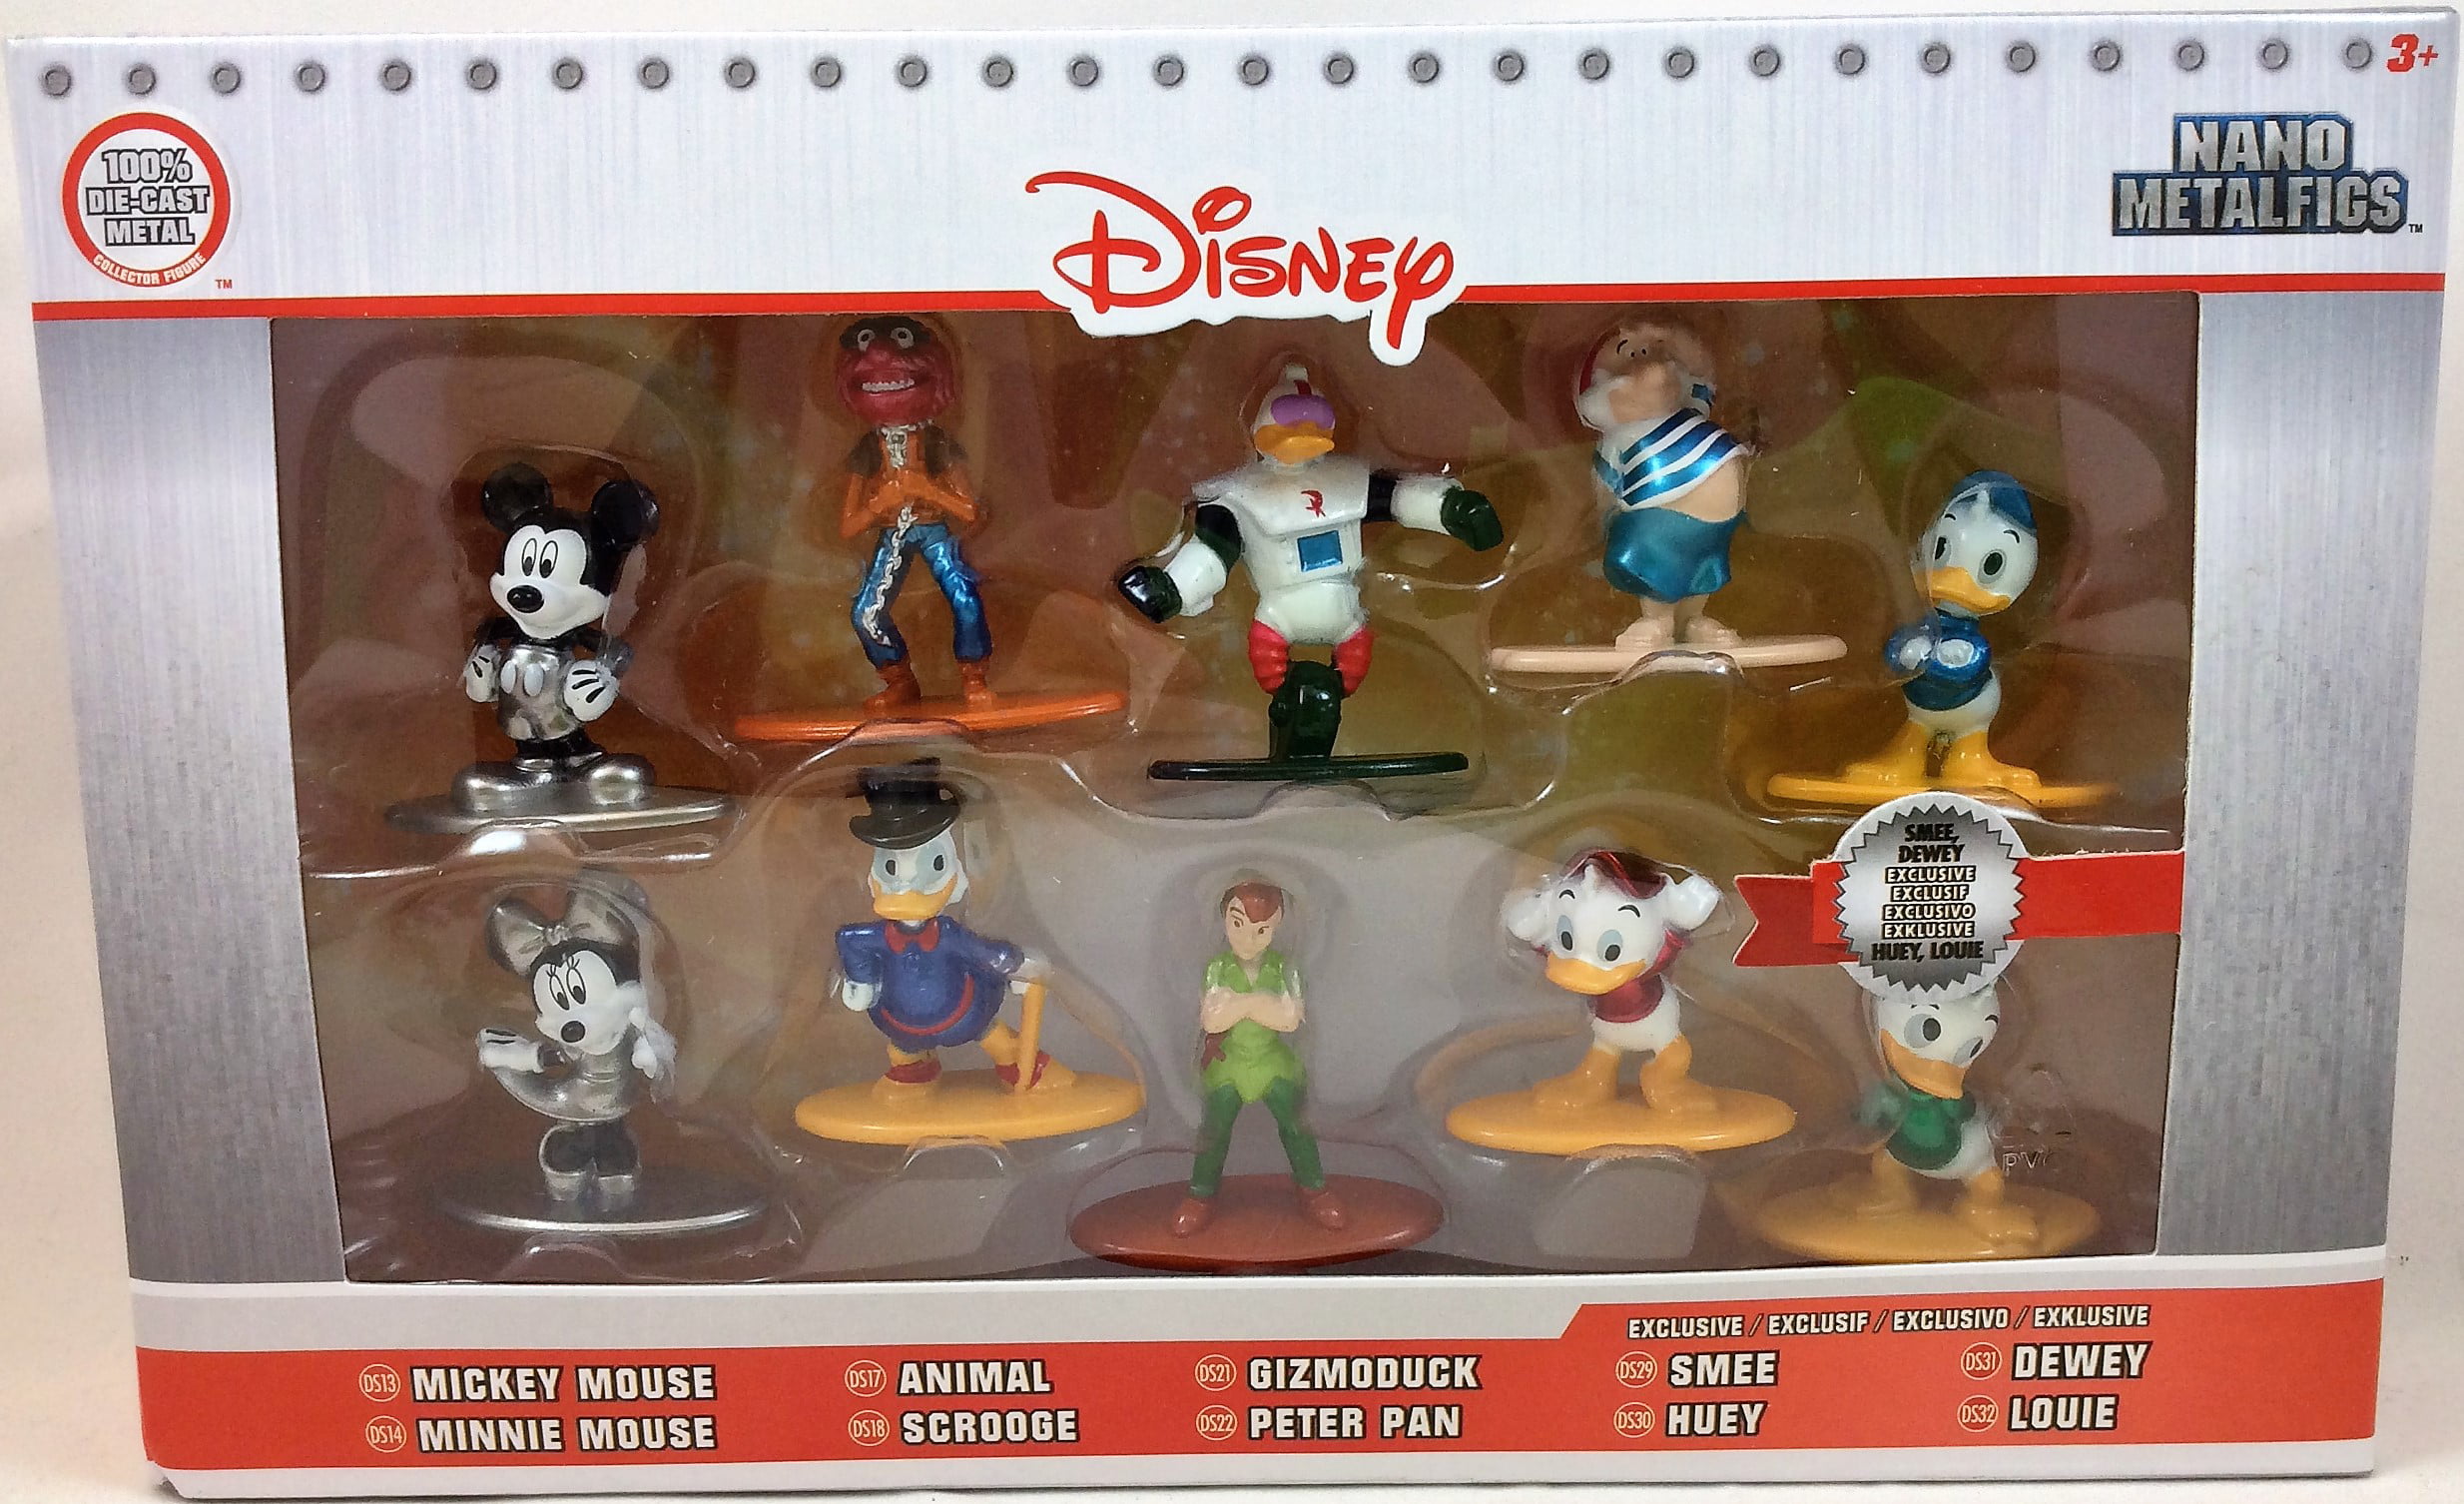 Details about   Disney Nano MetalFigs 10 Pack Figures Jada Mickey Mouse Scrooge Minnie Mouse 